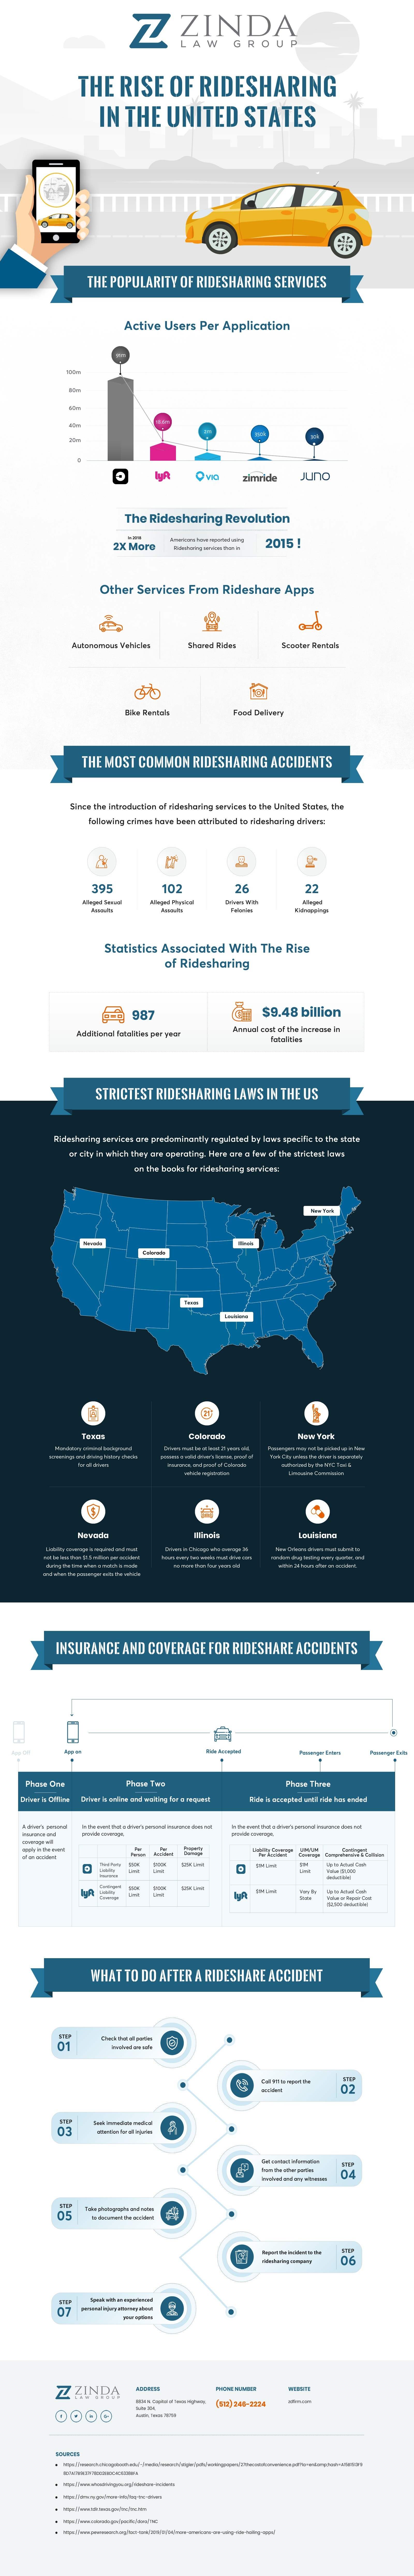 rideshare, uber, lyft car accident statistics in the united states infographic